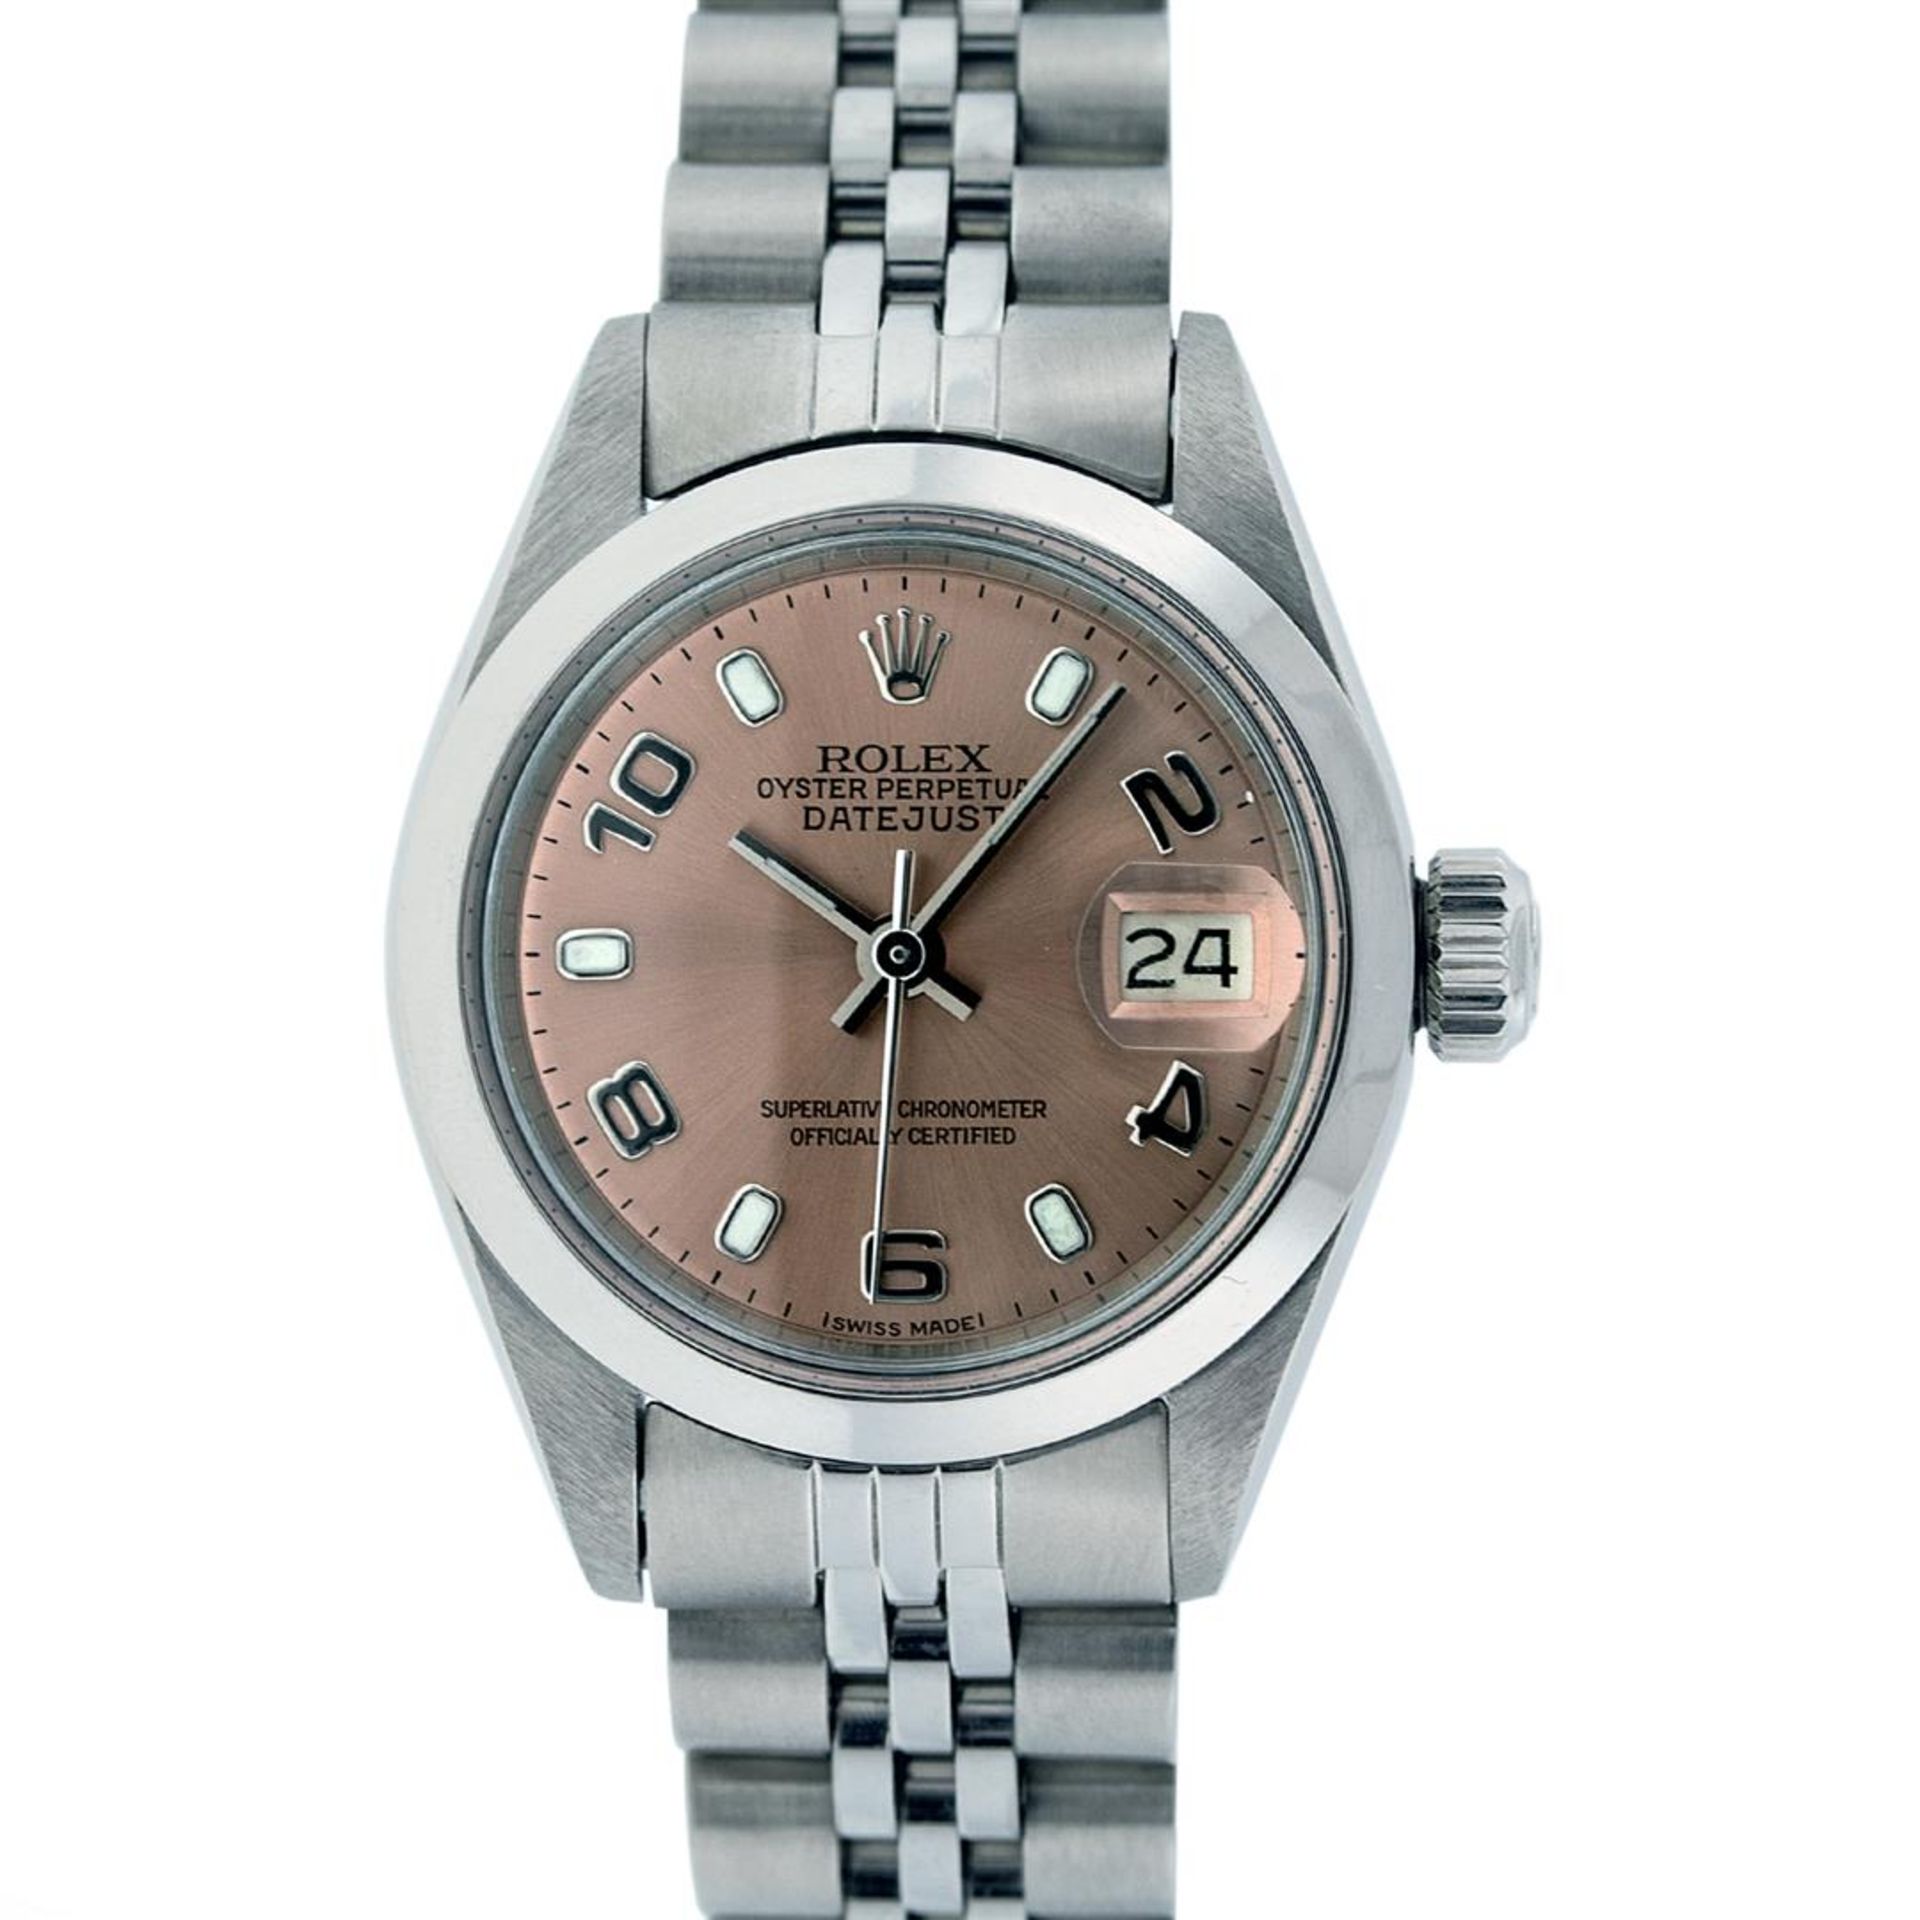 Rolex Ladies Stainless Steel Salmon Dial 26MM Datejust Wristwatch Oyster Perpetu - Image 3 of 9